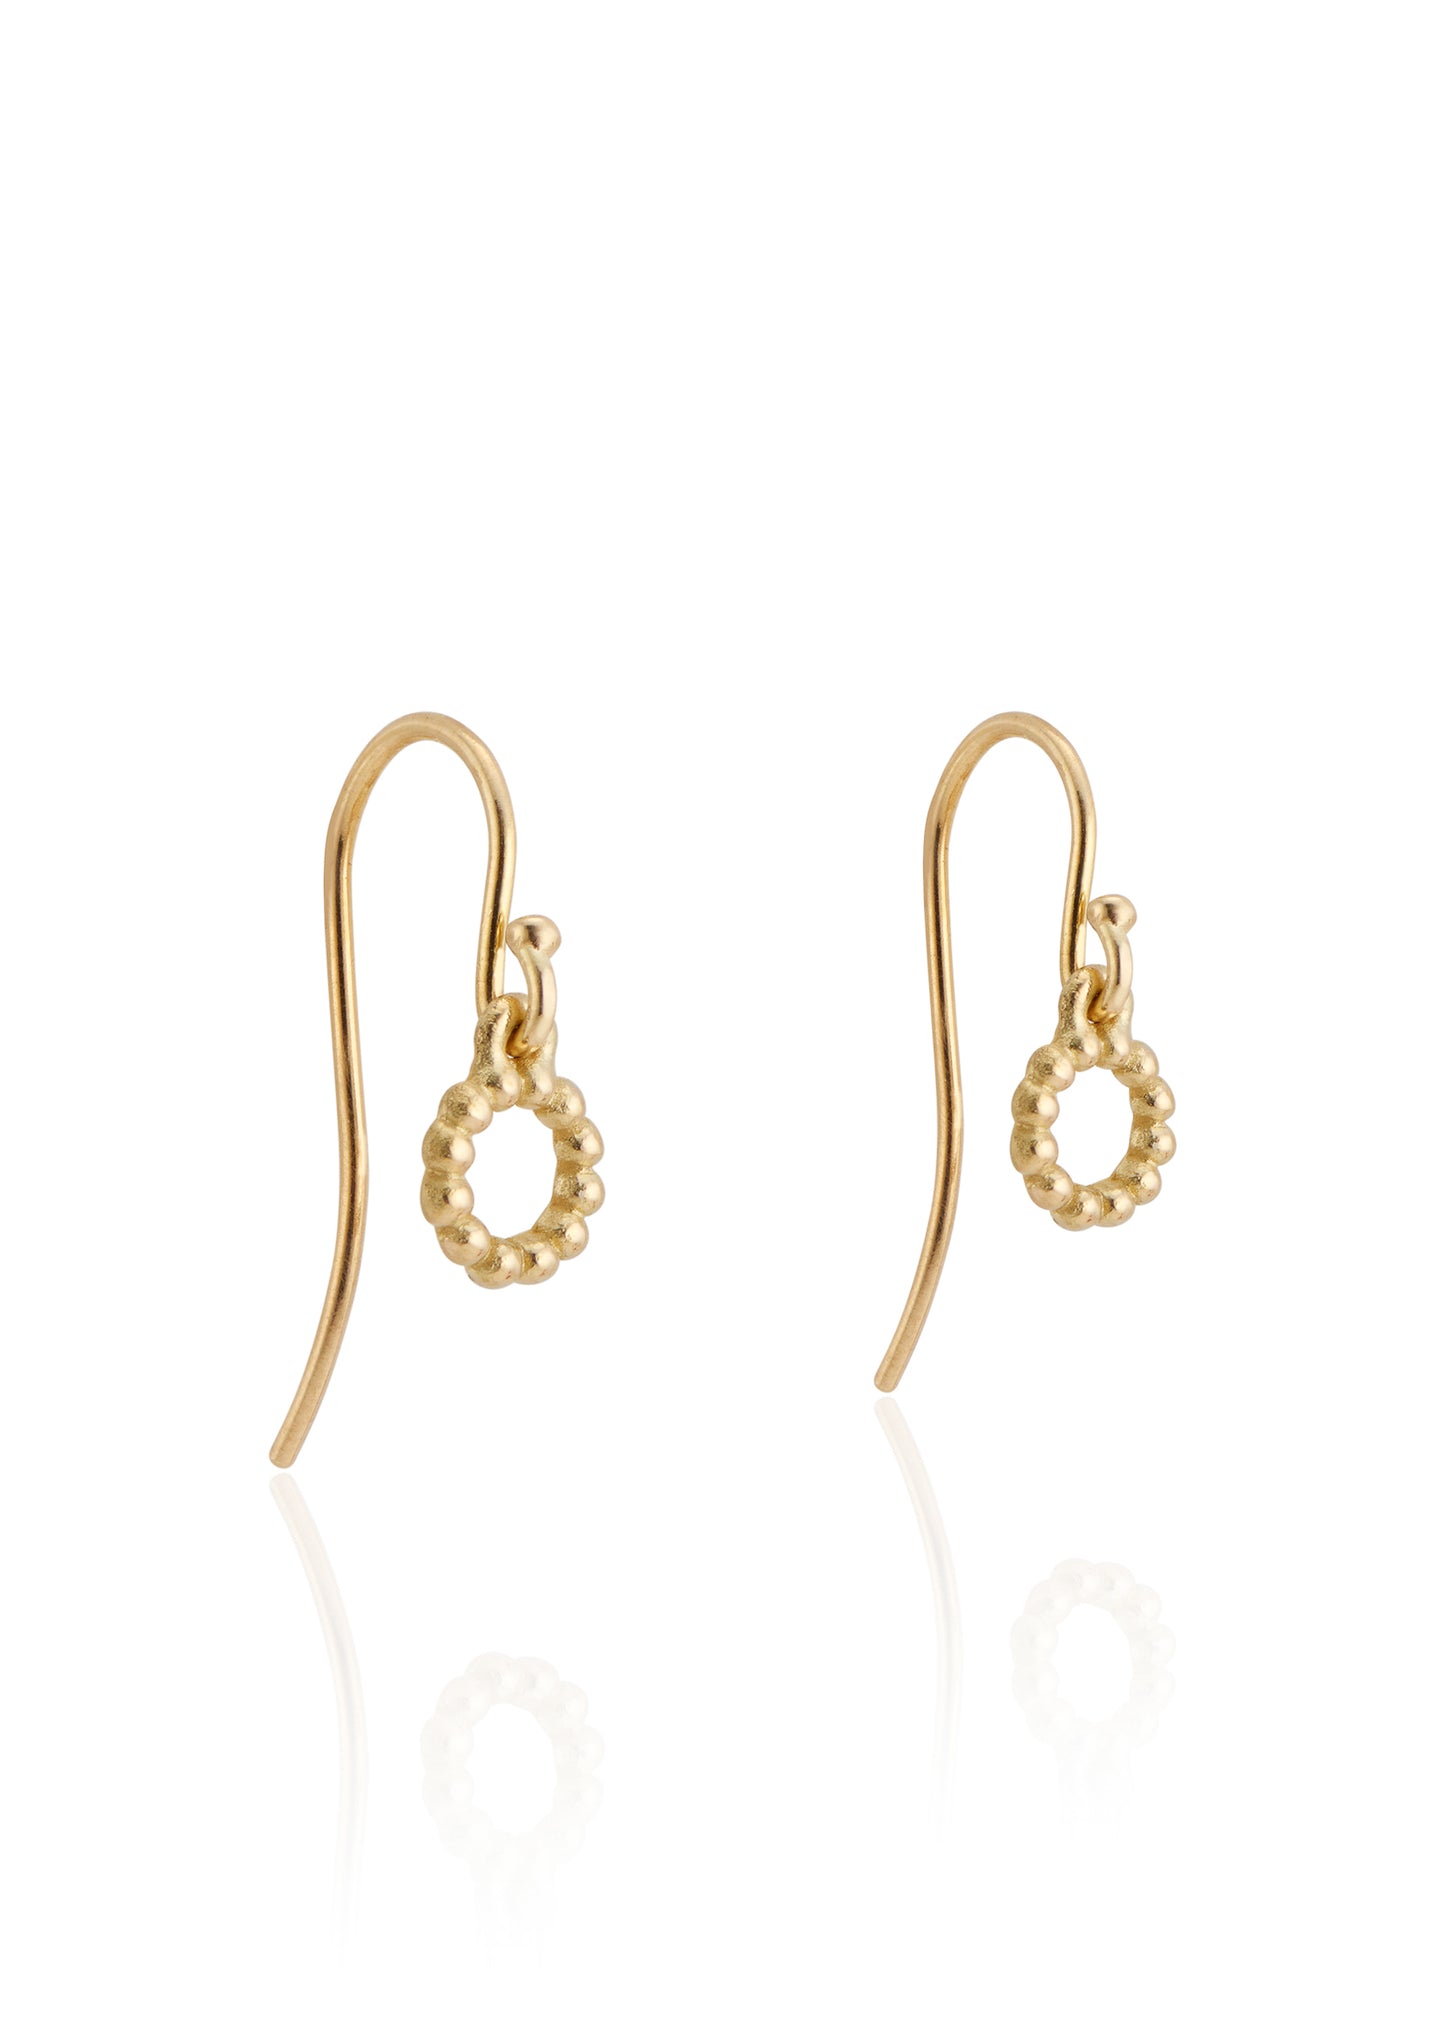 With a classic and understated aesthetic, the Orb earring showcases hand-carved gold beads joined in a perfect ring—a delicate design as timeless as the infinite circle itself. 